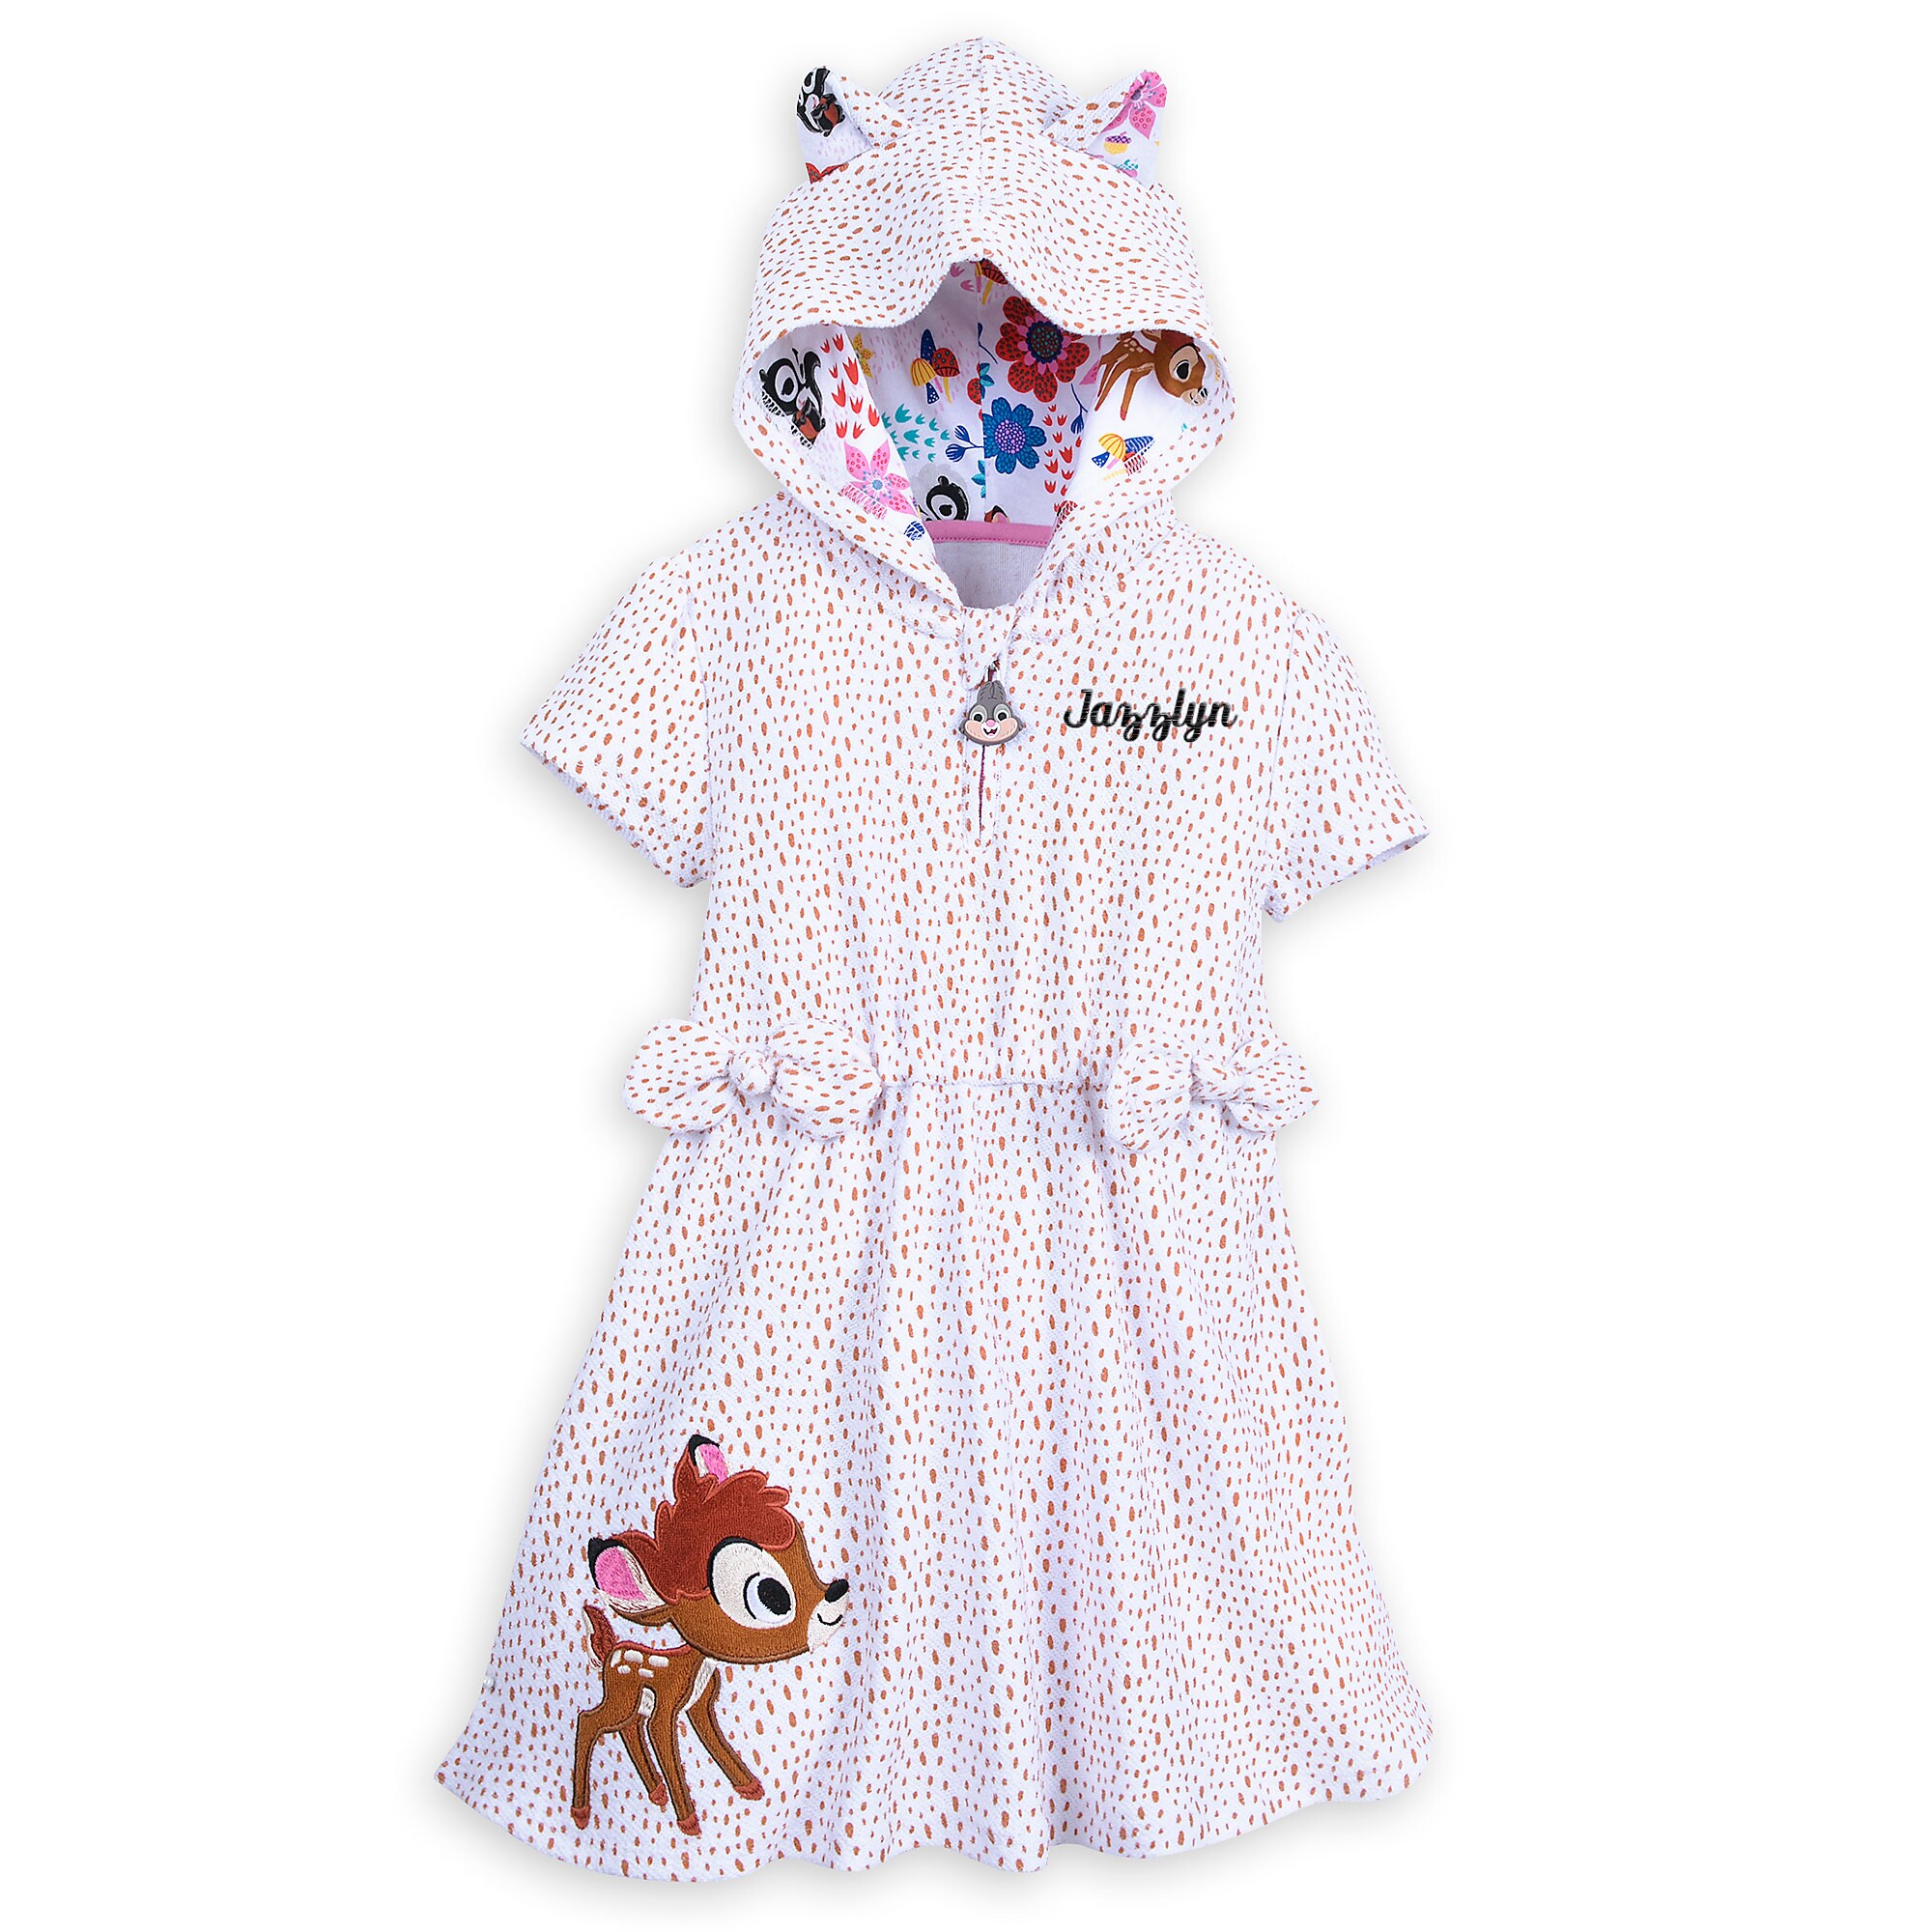 Bambi Swim Cover Up for Girls - Disney Furrytale friends - Personalized